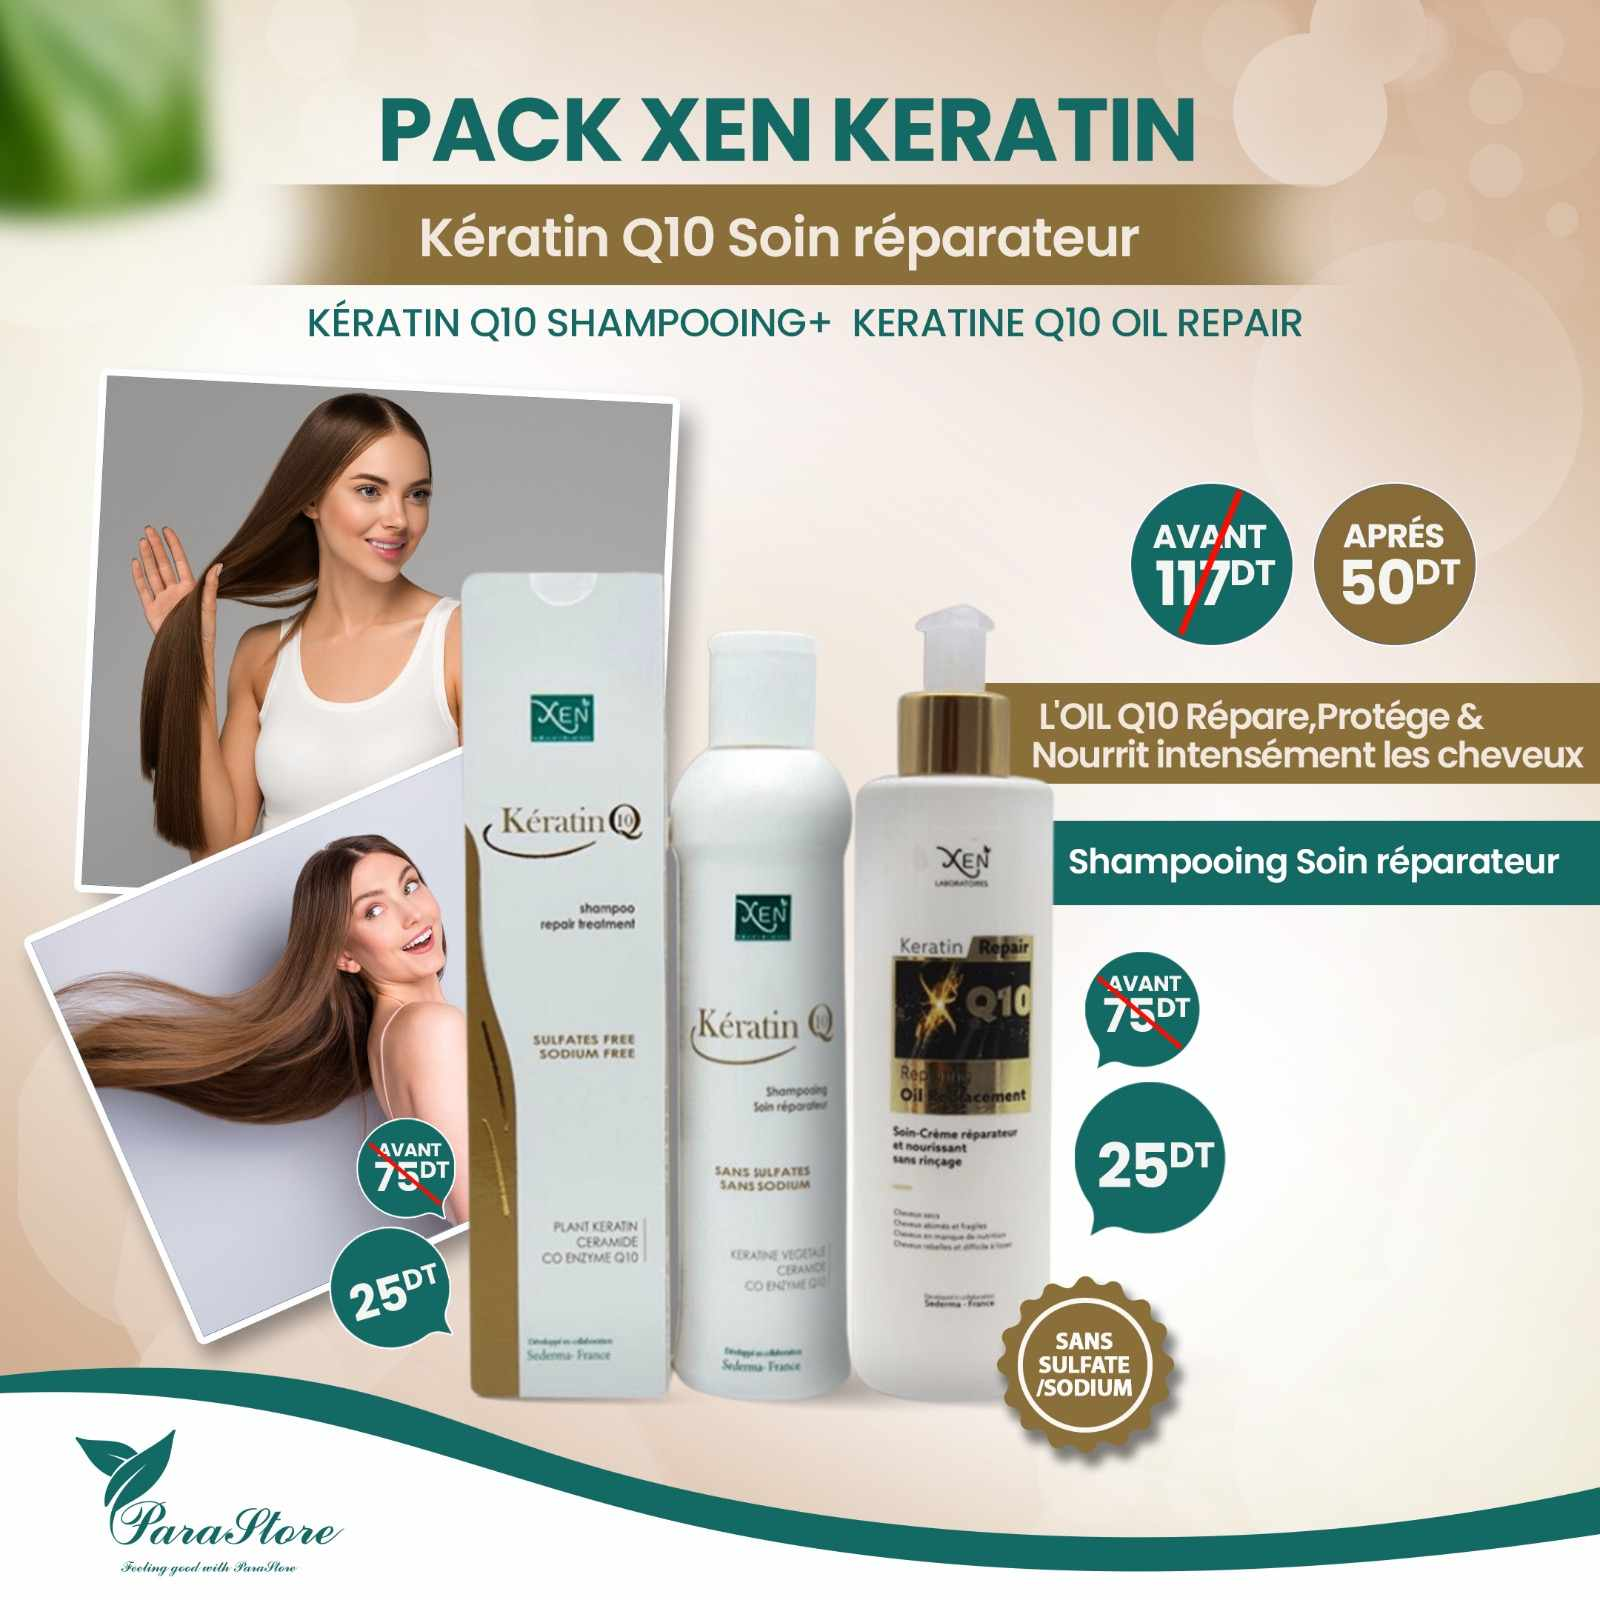 PACK XEN KERATIN Q10 SHAMPOING + OIL REPLACEMENT SPF 30+